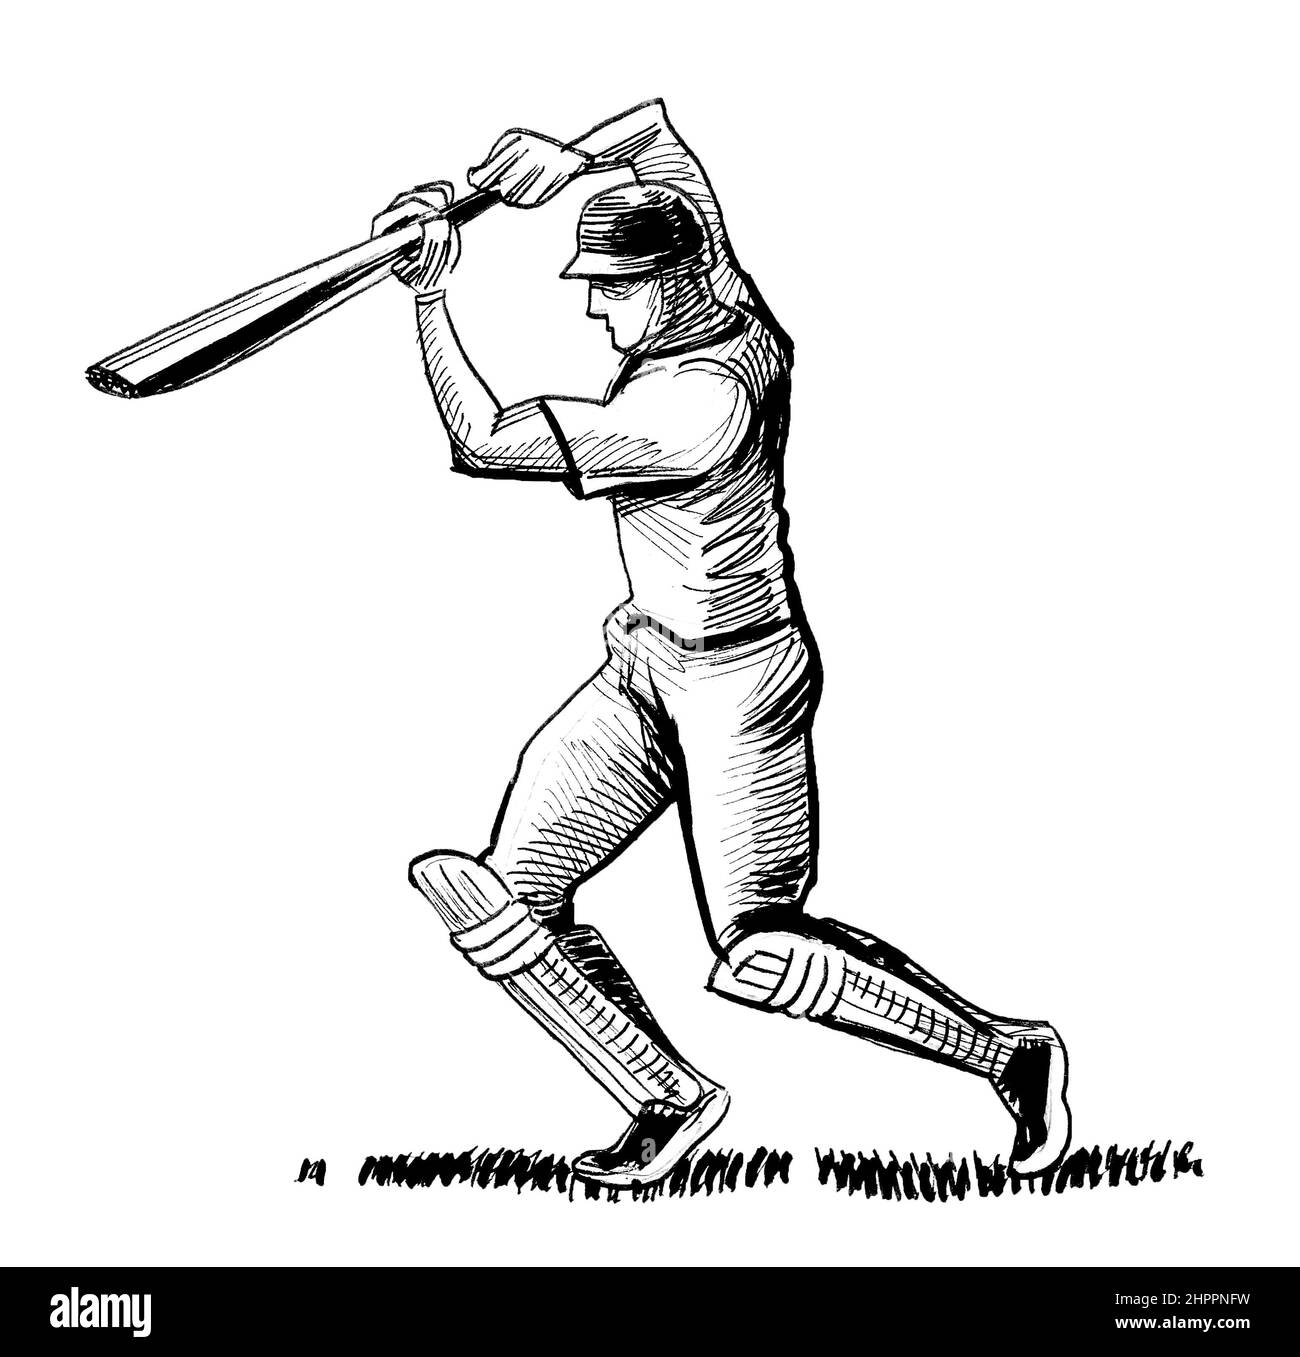 Cricket player. Ink black and white drawing Stock Photo